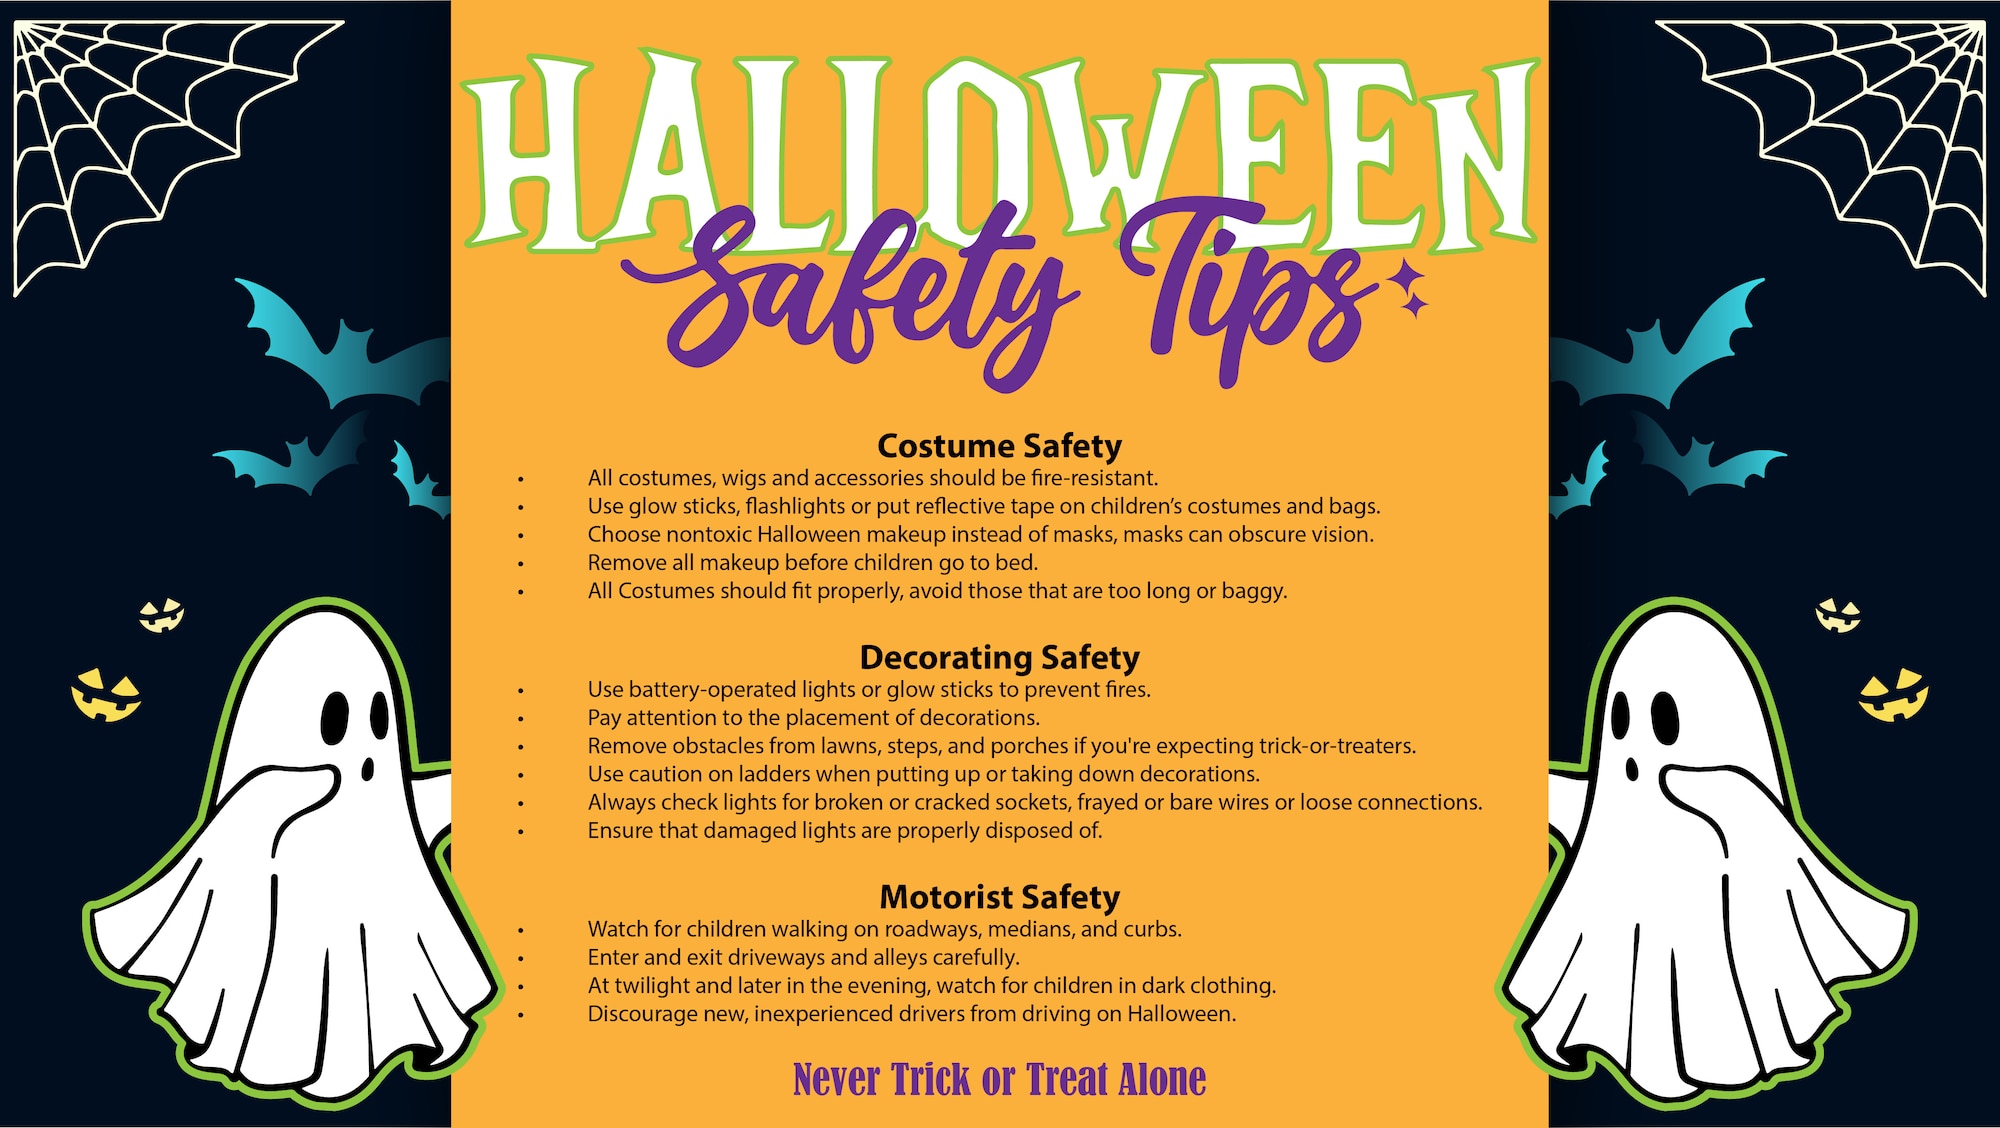 Arnold Engineering Development Complex Safety personnel urge folks to be cautious when decorating for Halloween, dressing up children for an evening of trick-or-treating or while traveling on Halloween night. (U.S. Air Force graphic by Brooke Brumley)